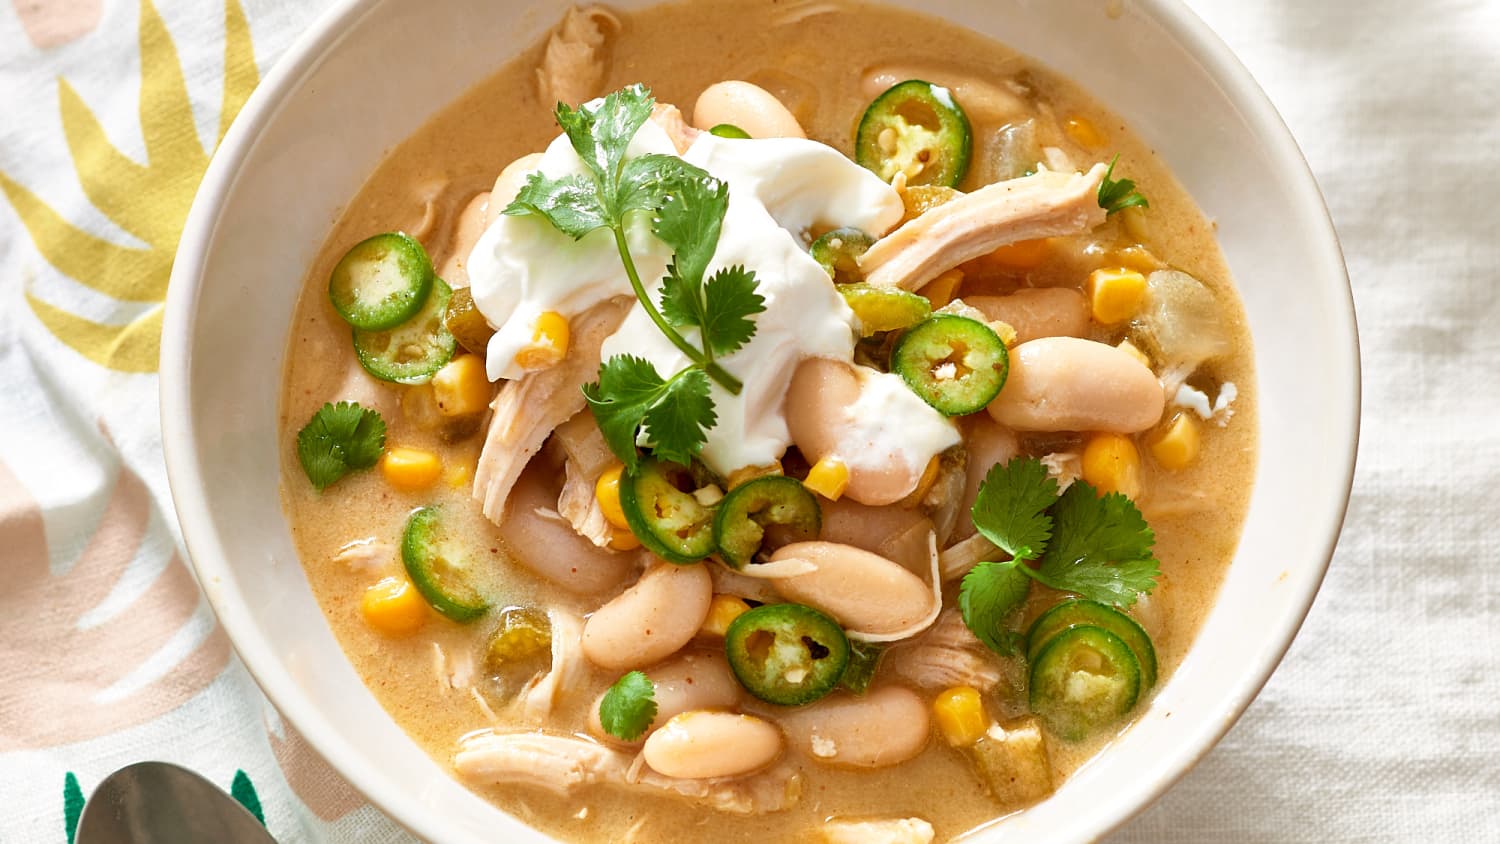 Favorite Soup Our Kids LOVE- White Bean Chicken Chili in Slow Cooker -  Nesting With Grace